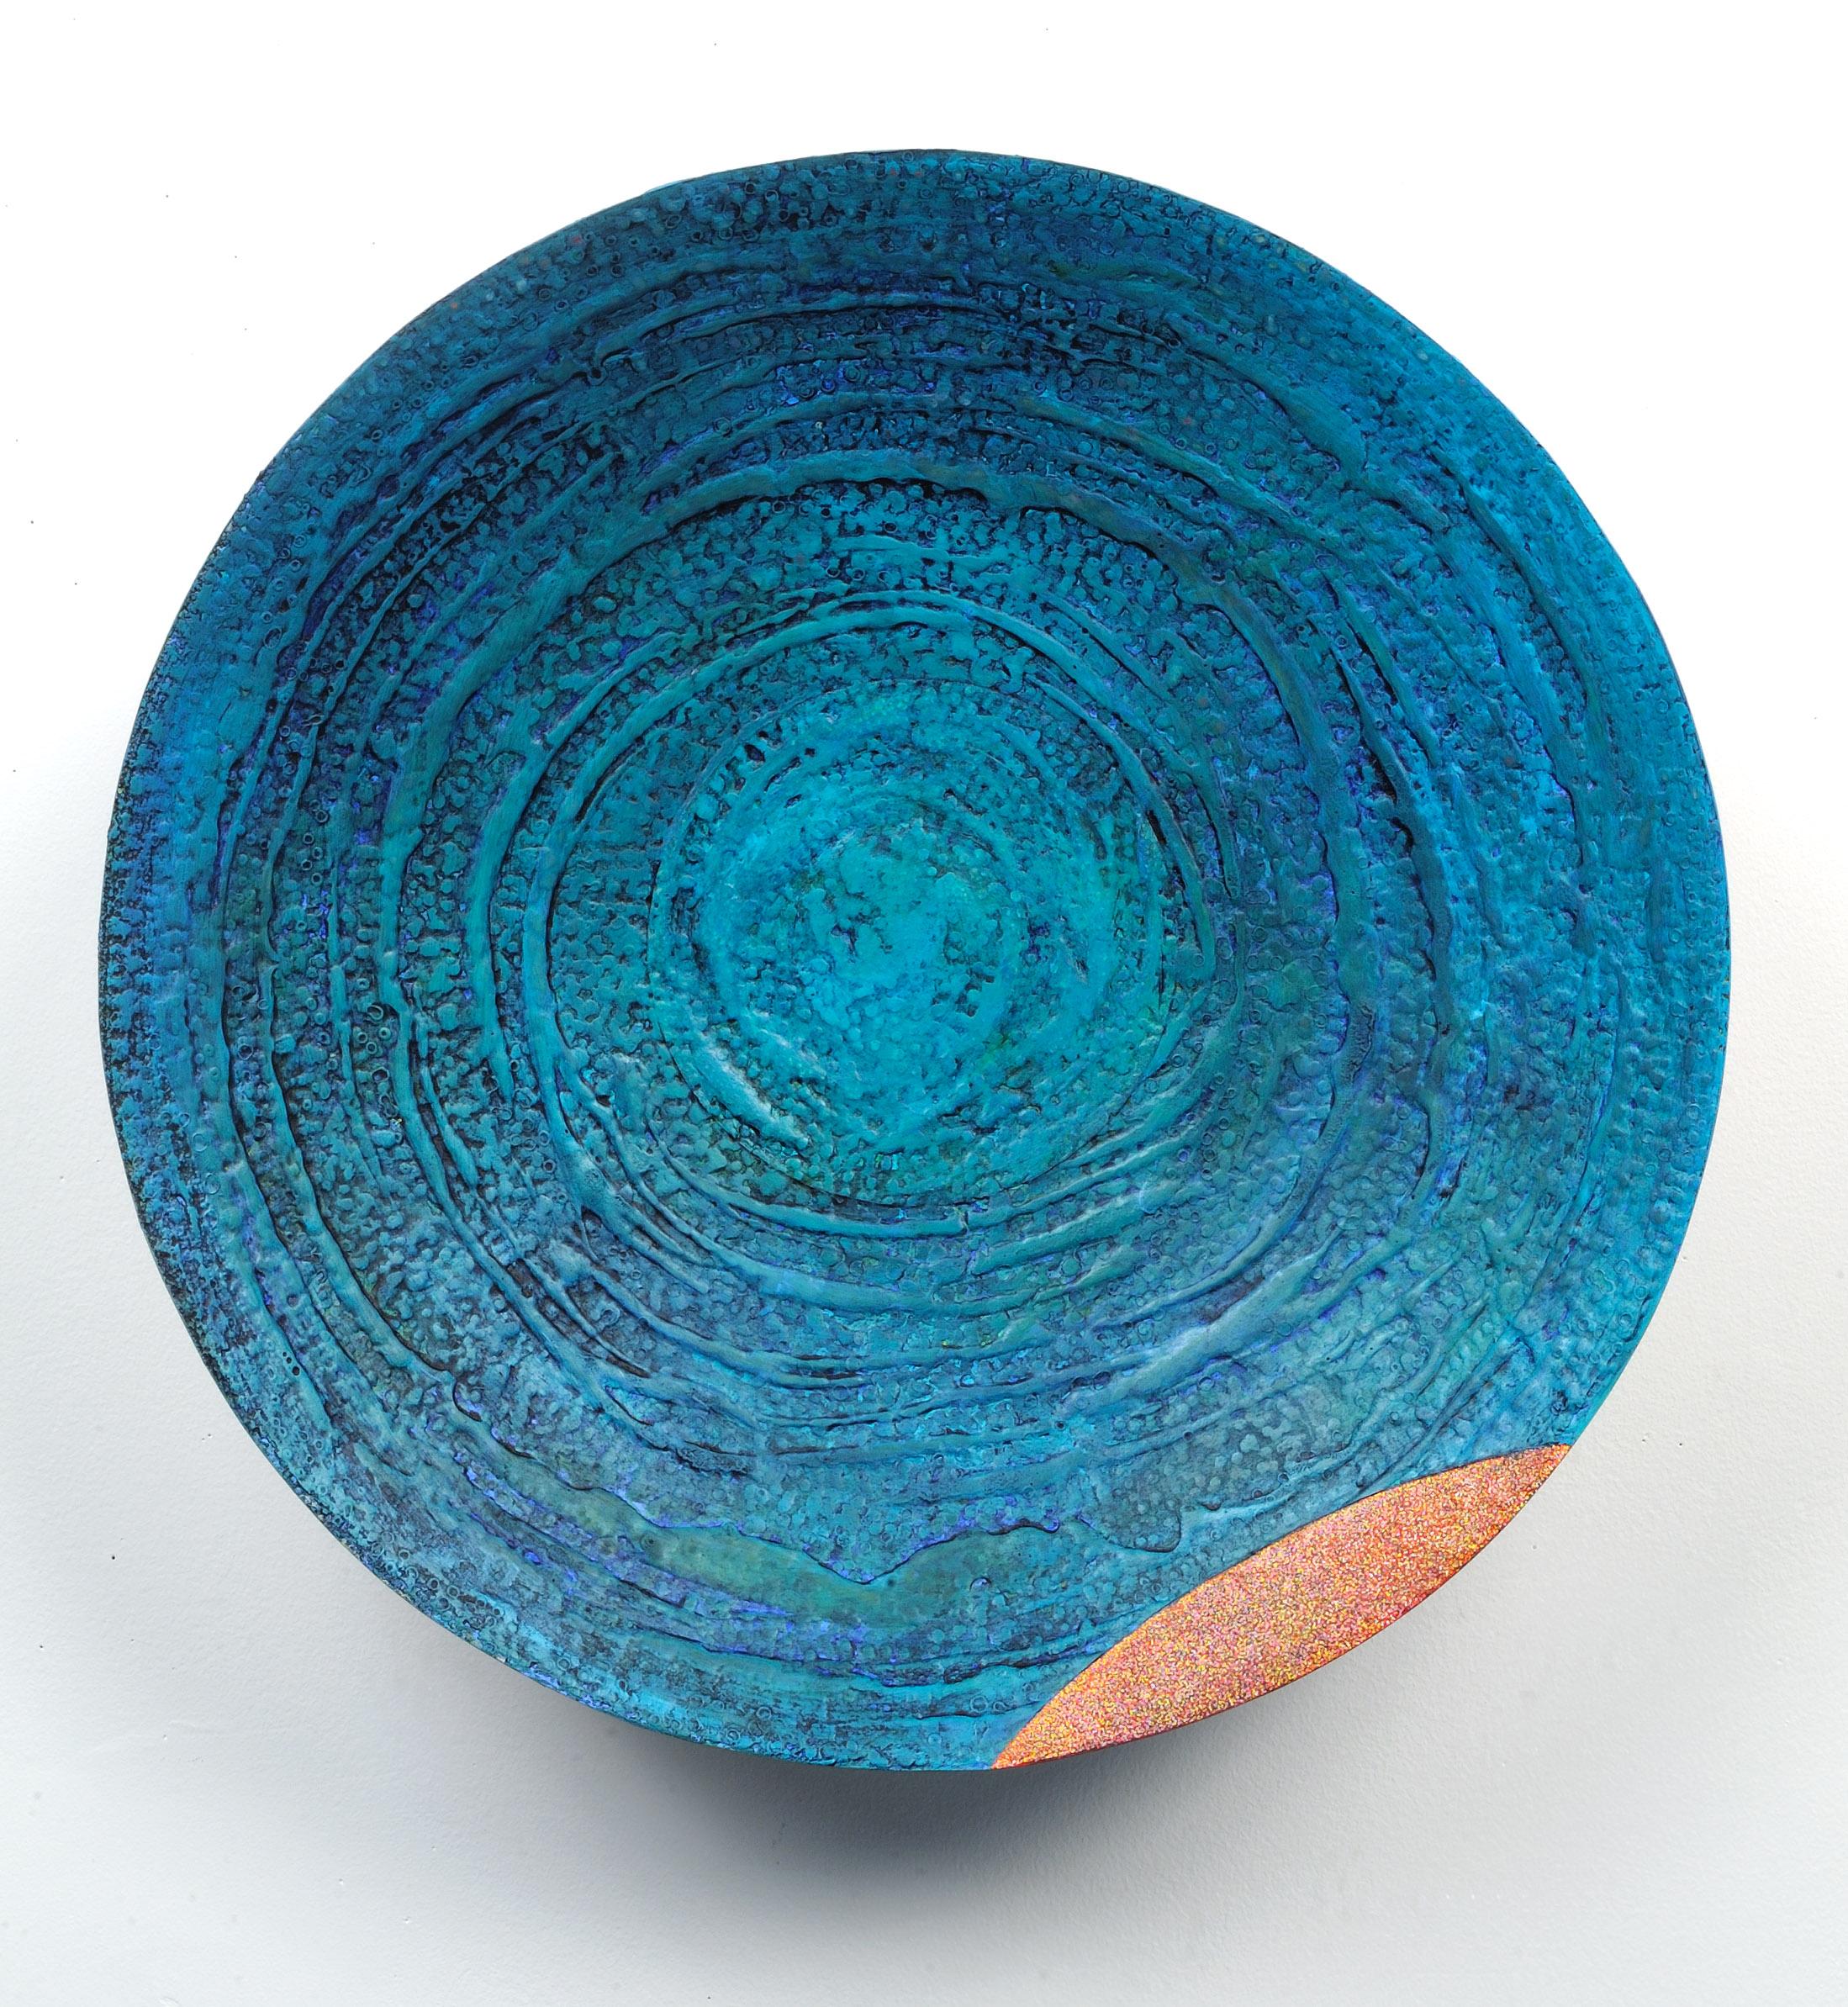 Francie Hester Abstract Sculpture - Vessel E, blue and orange abstract painting on plexiglass, mixed media